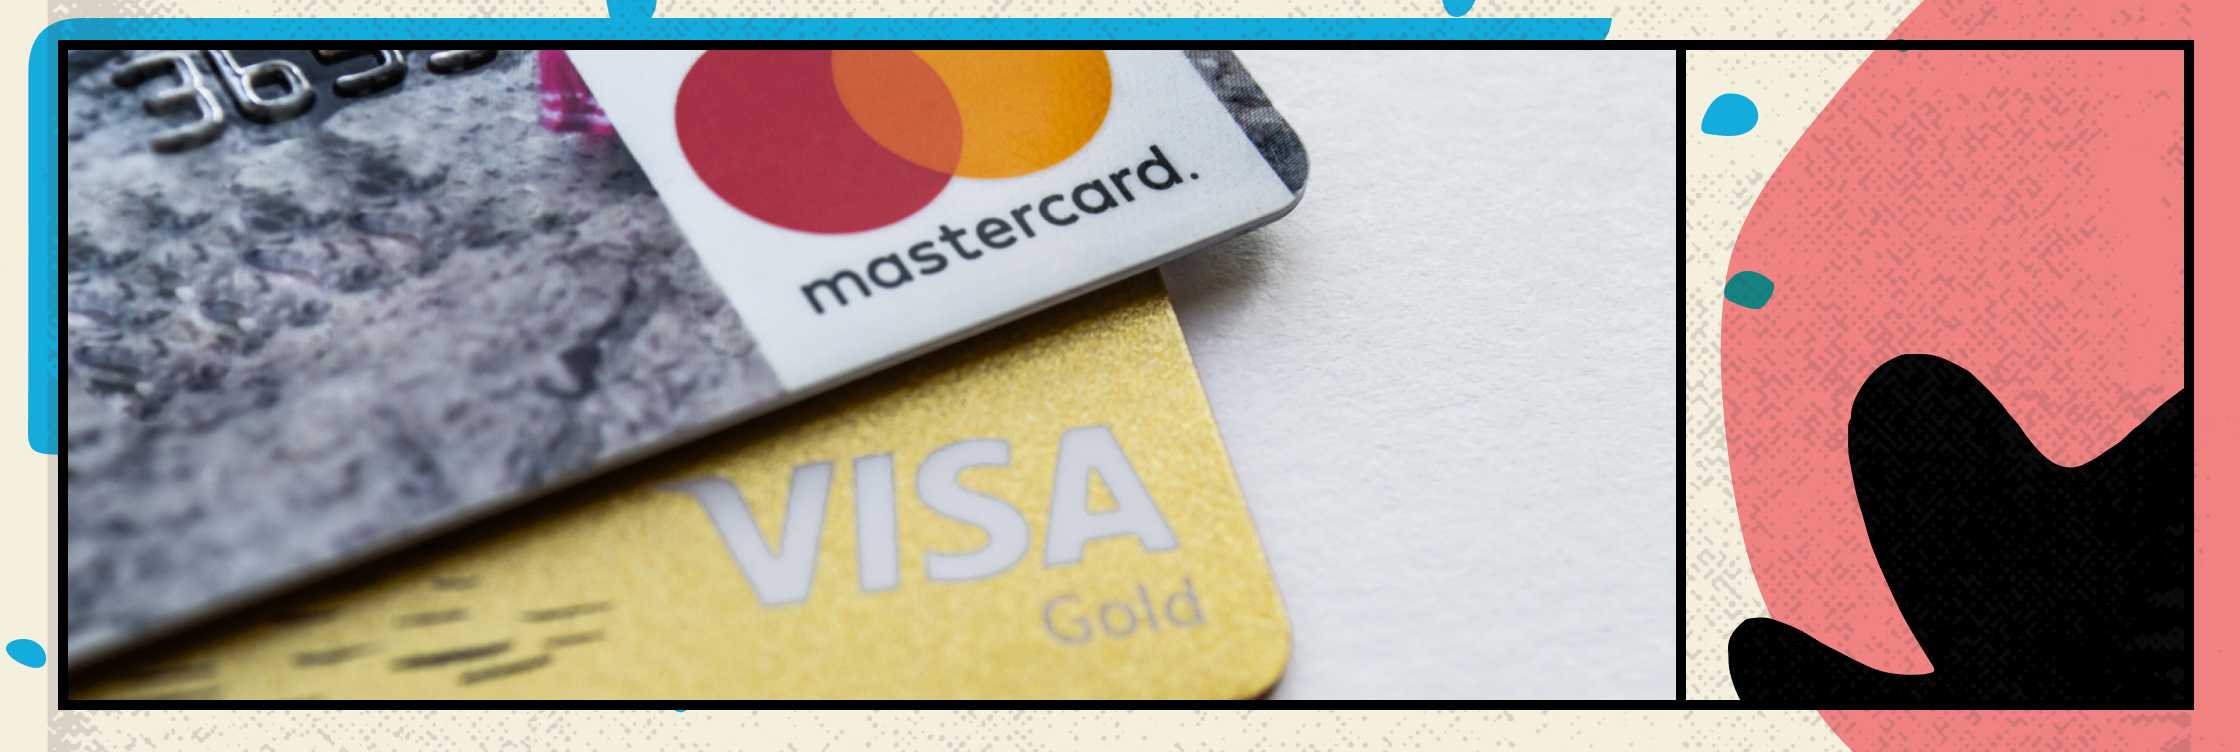 Bitcoin Goes After Visa and Mastercard in Transaction Volume